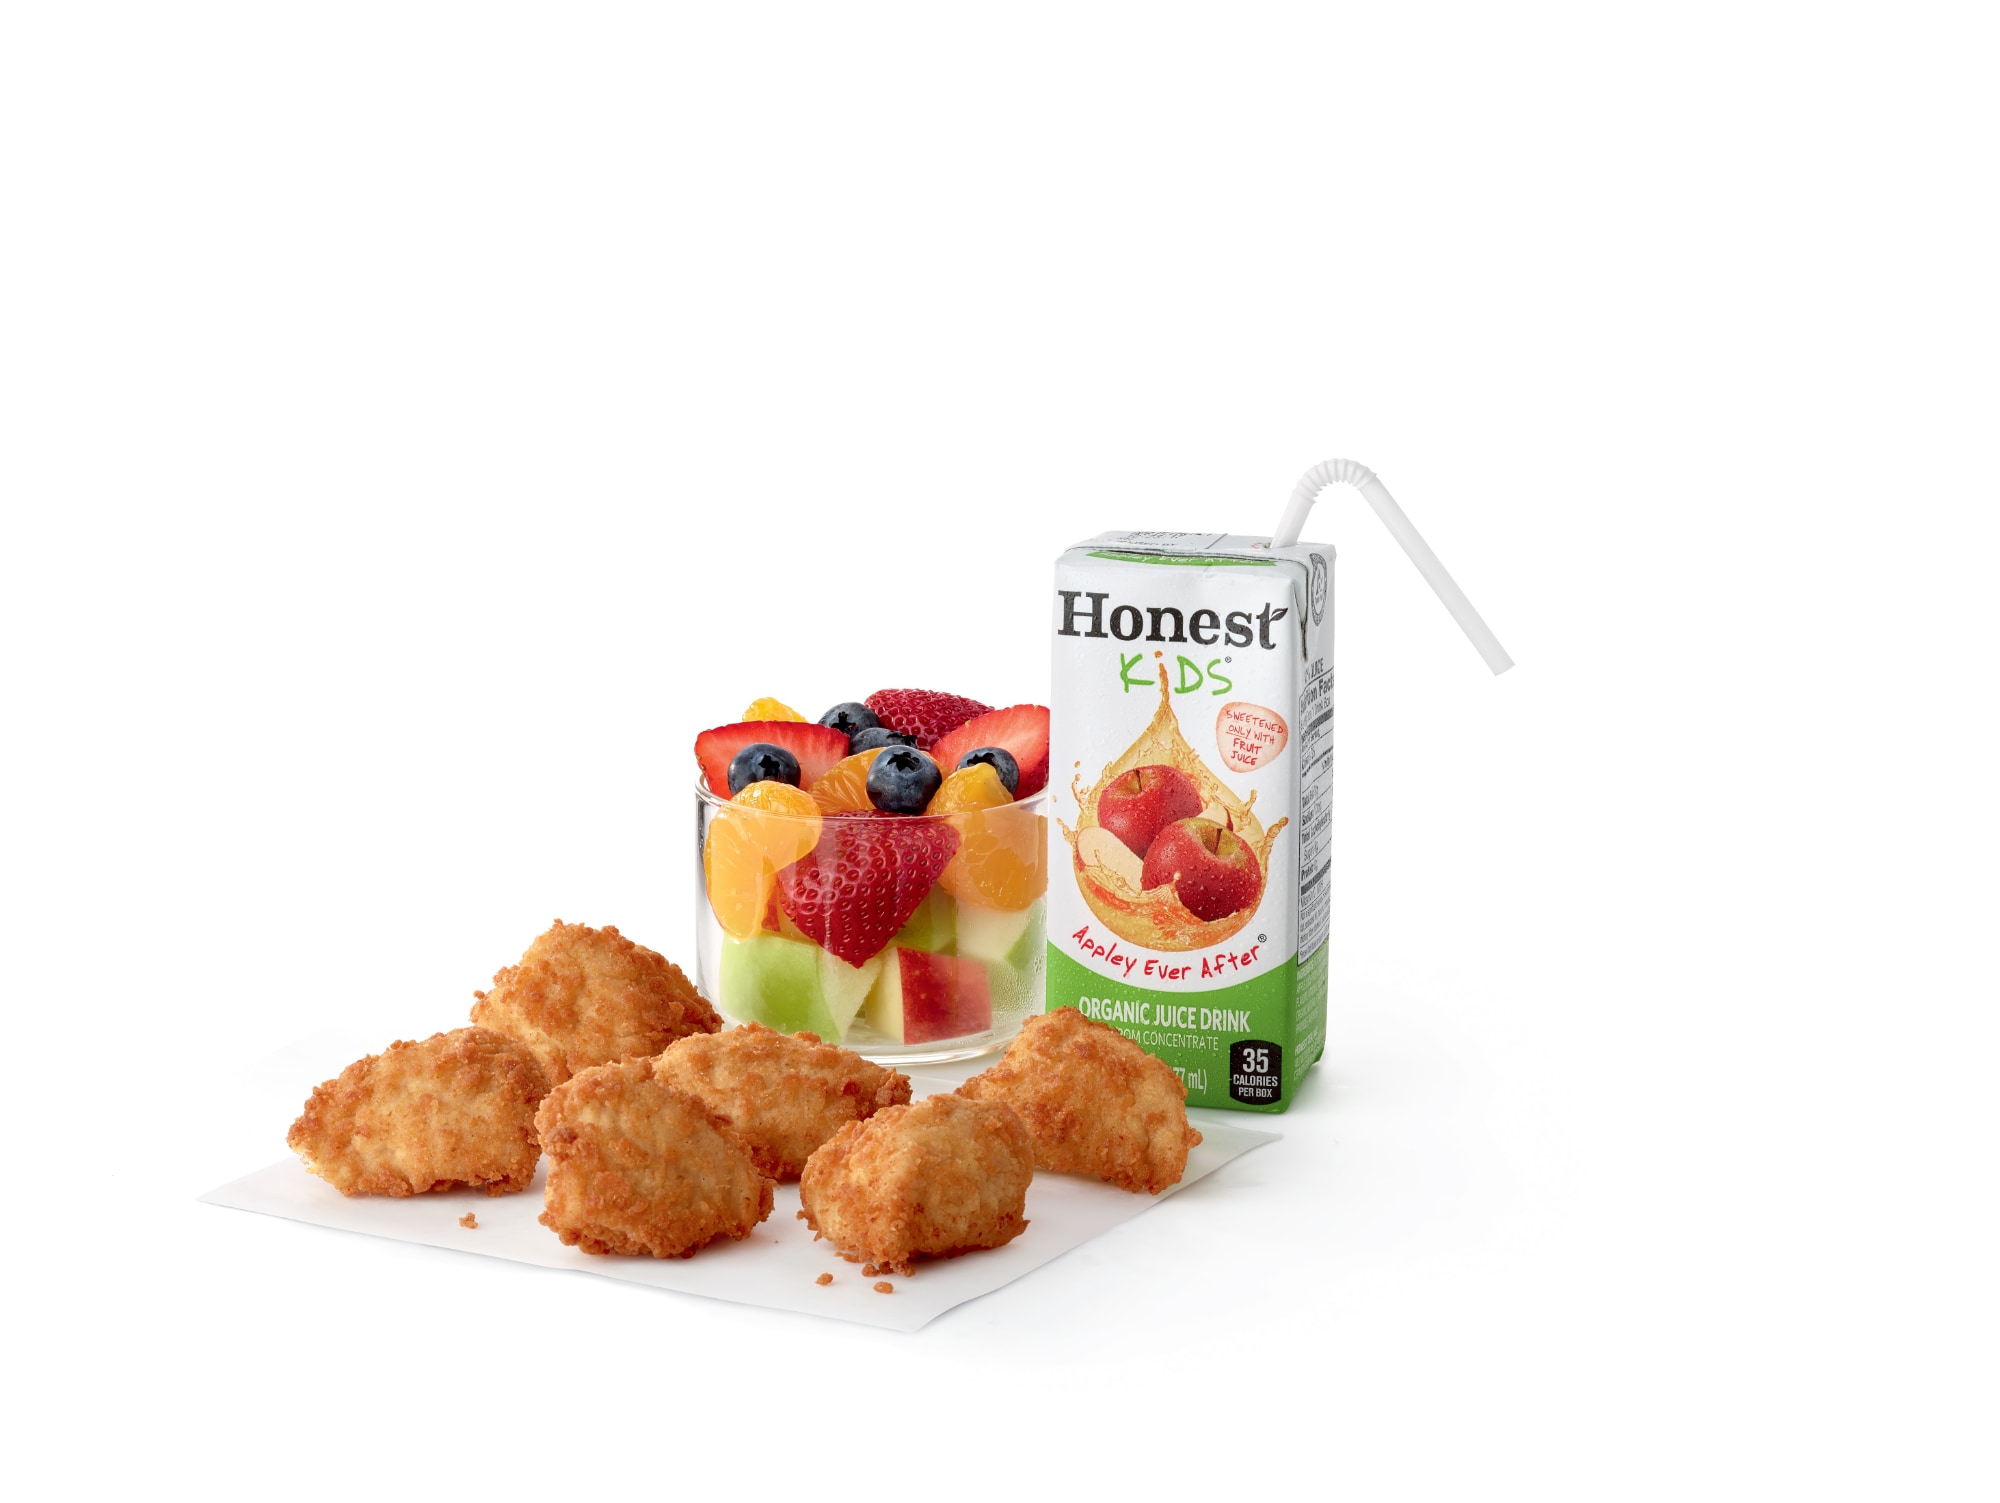 Six piece Chick-fil-A nuggets with Fruit Cup and Honest Kids Apple Juice box. 